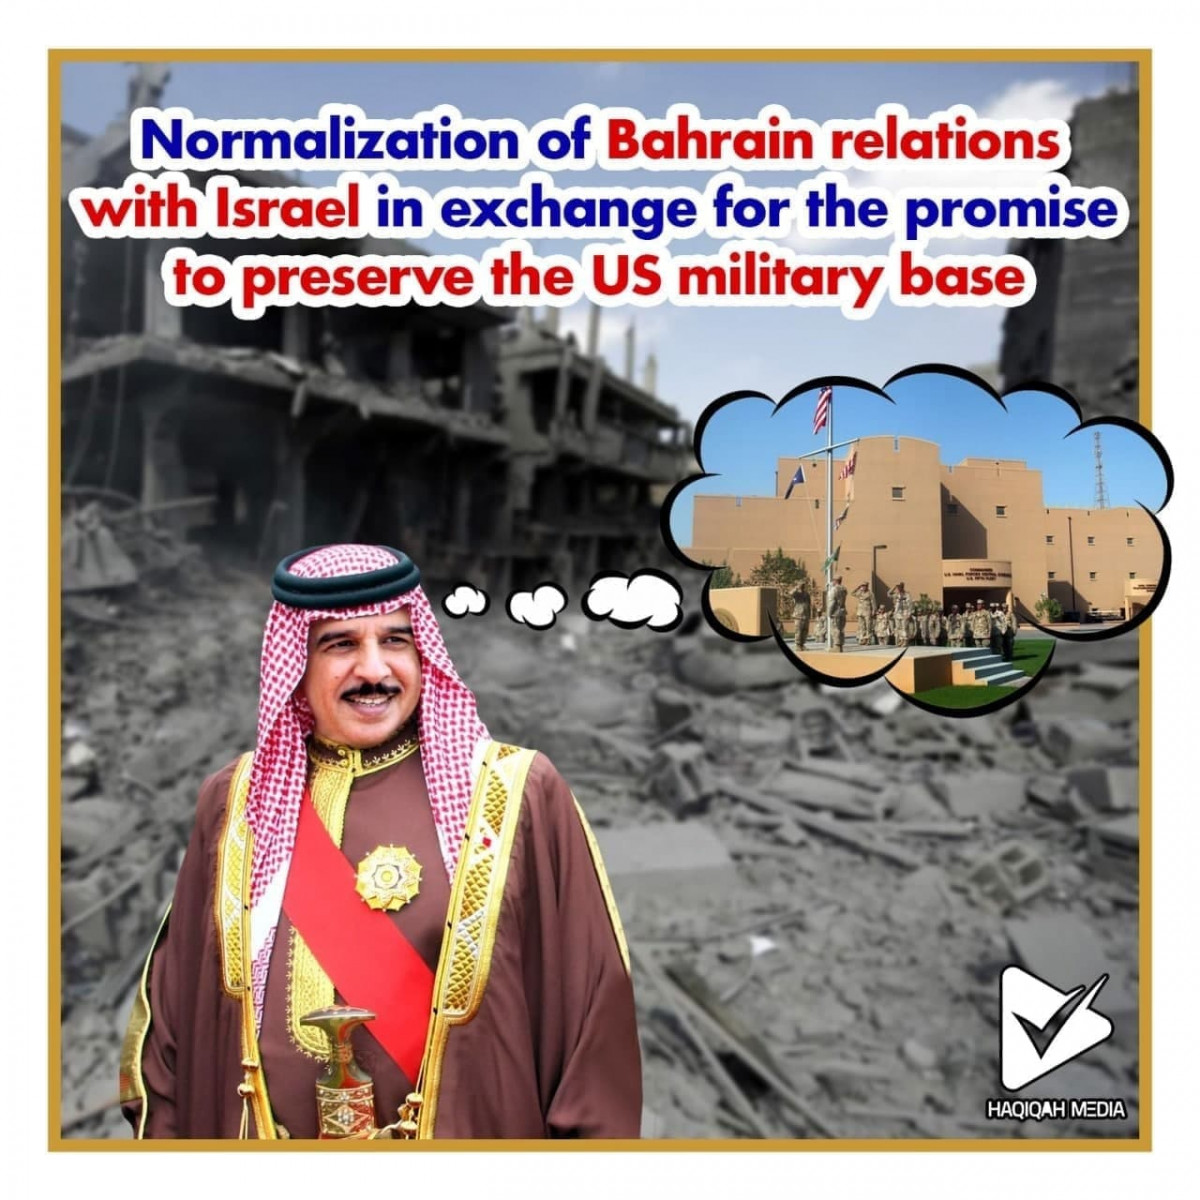 Normalization of Bahrain relations with Israel in exchange for the promis to preserve the US military base